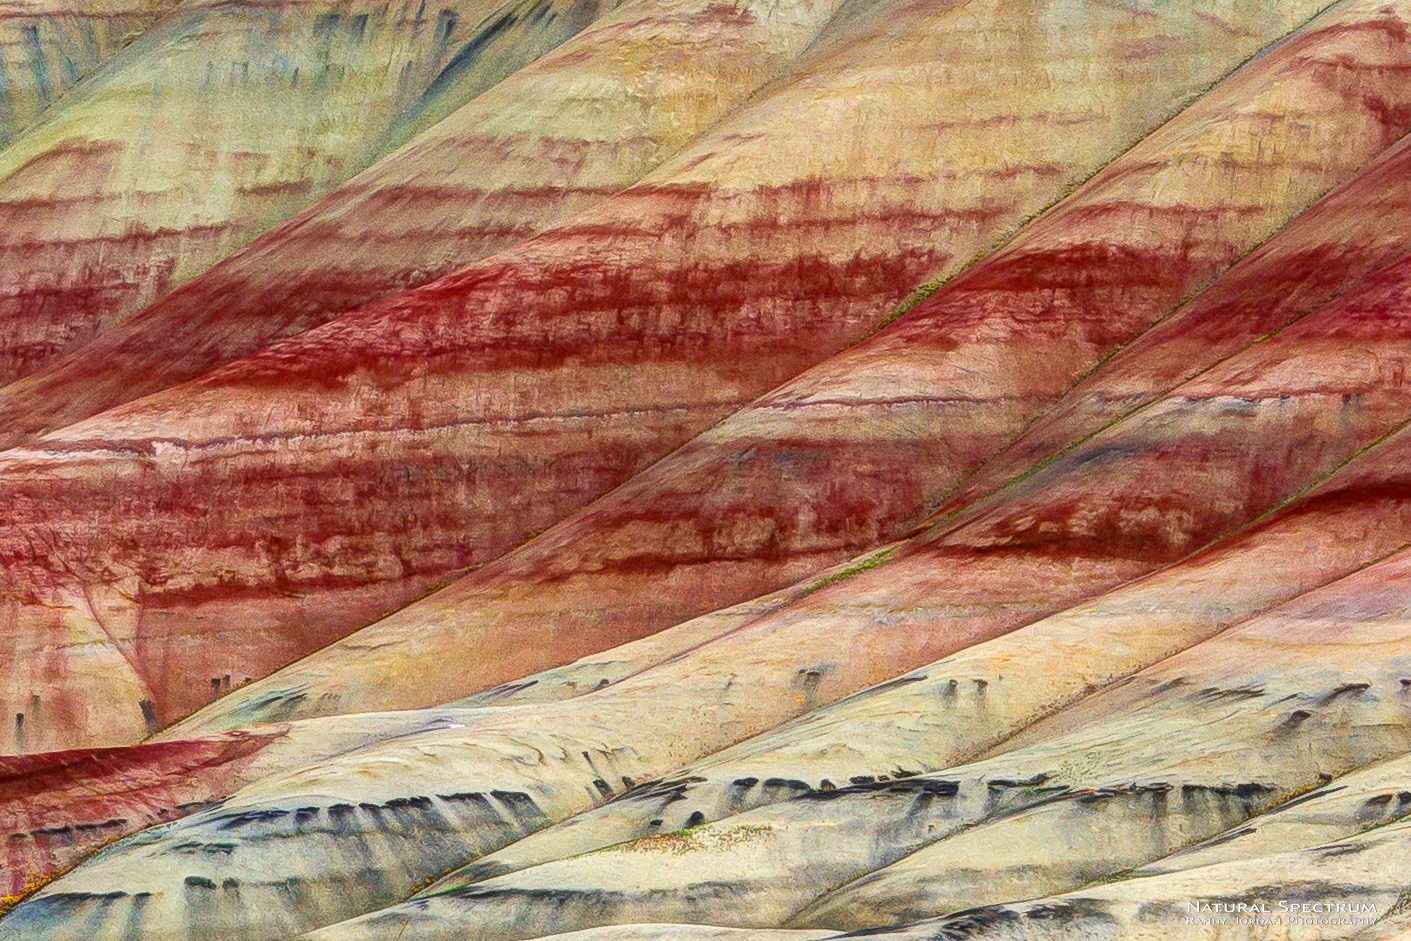 Intimate view of the Painted Hills, John Day Fossil Beds, Oregon.